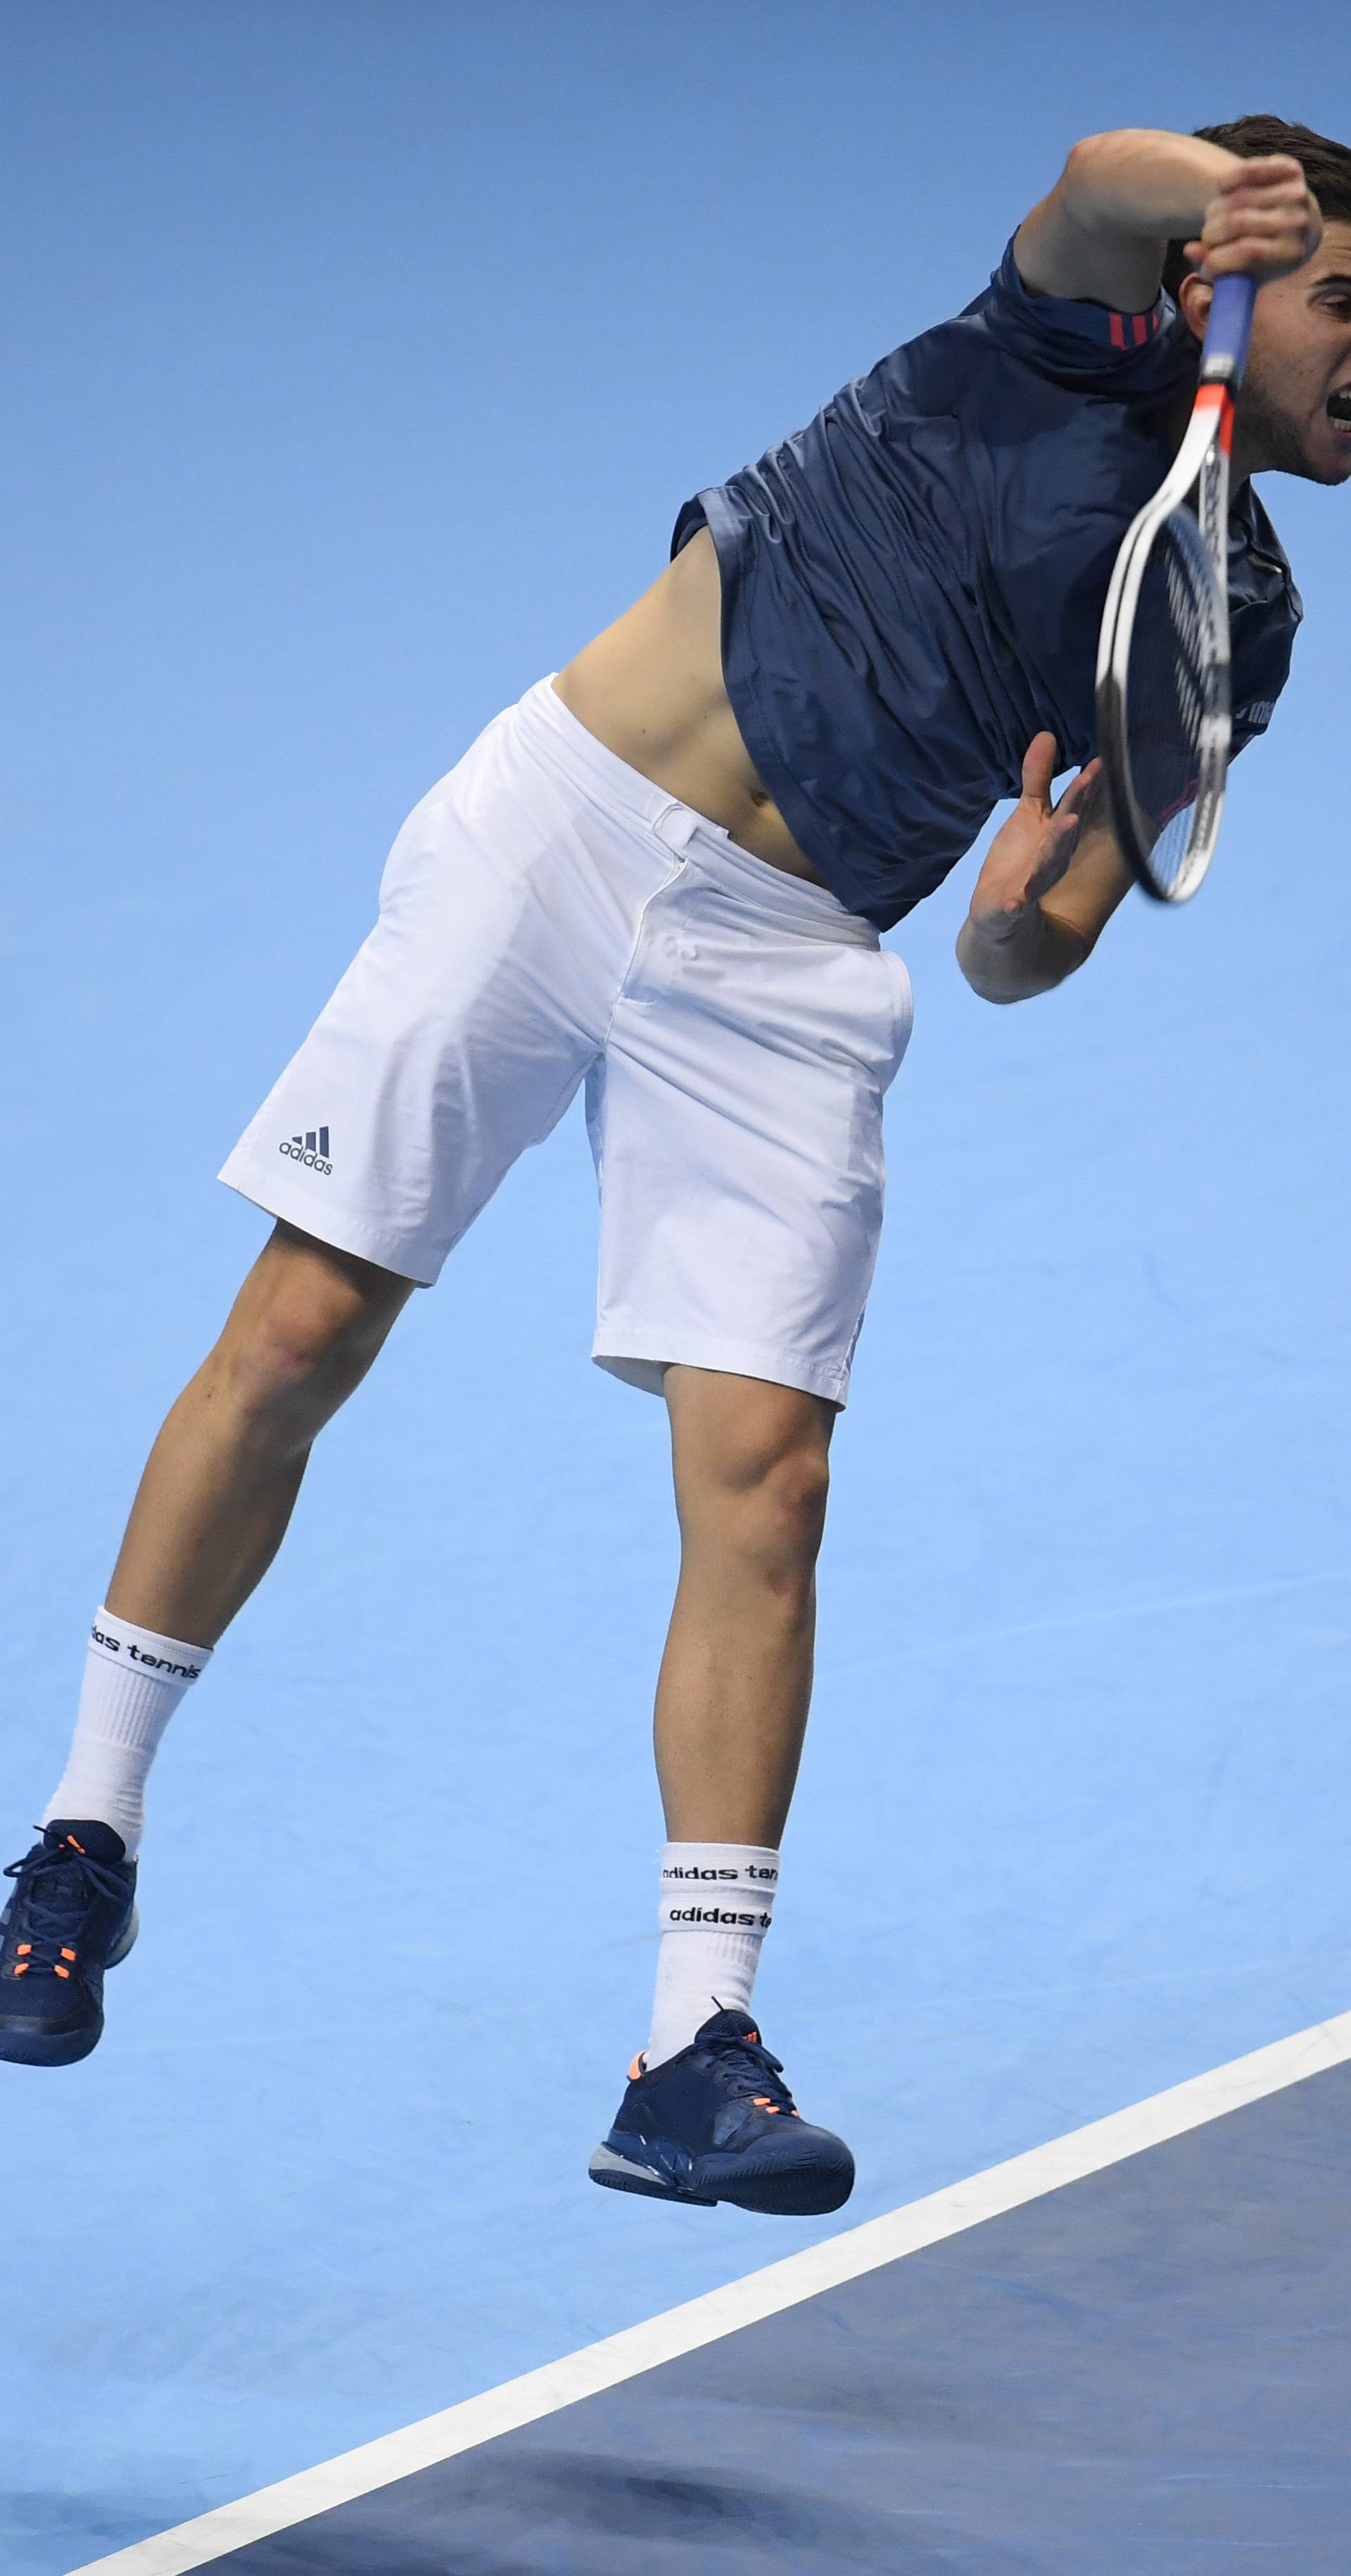 Austria's Dominic Thiem in action during his round robin match with Canada's Milos Raonic